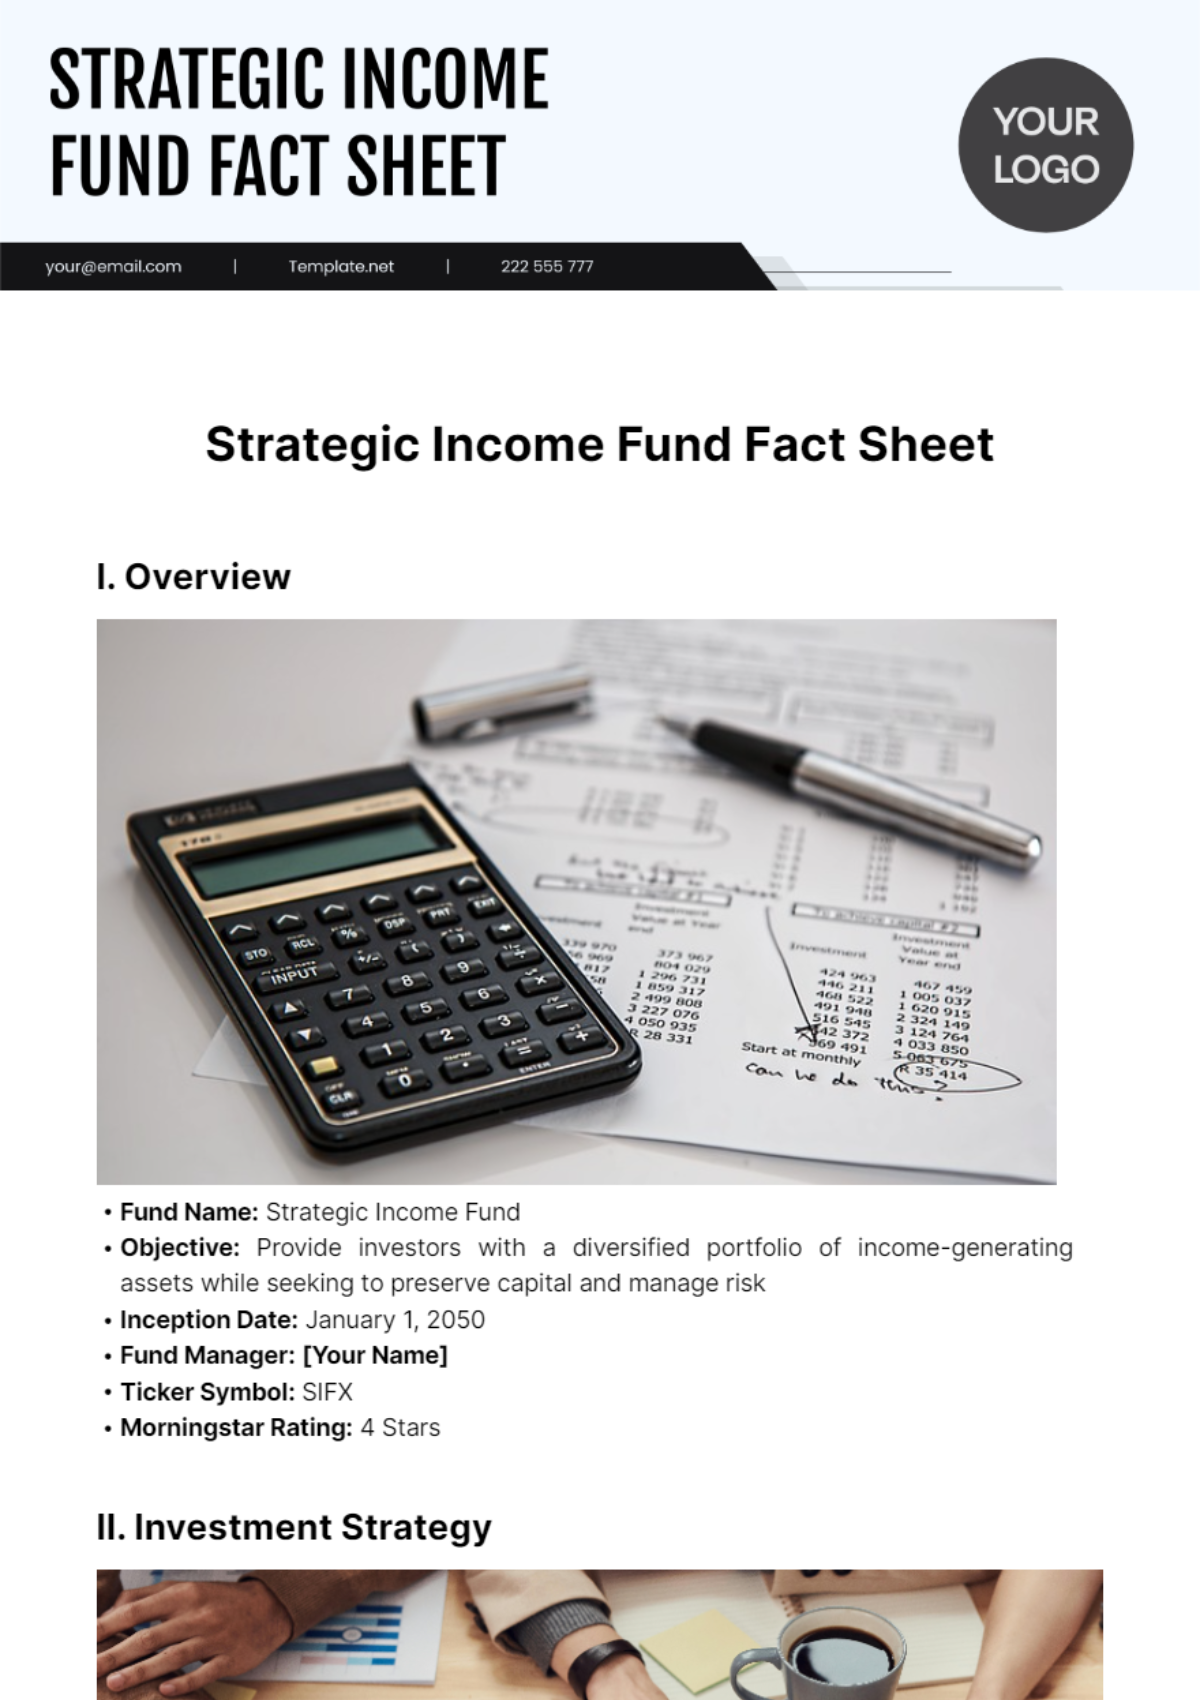 Strategic Income Fund Fact Sheet Template